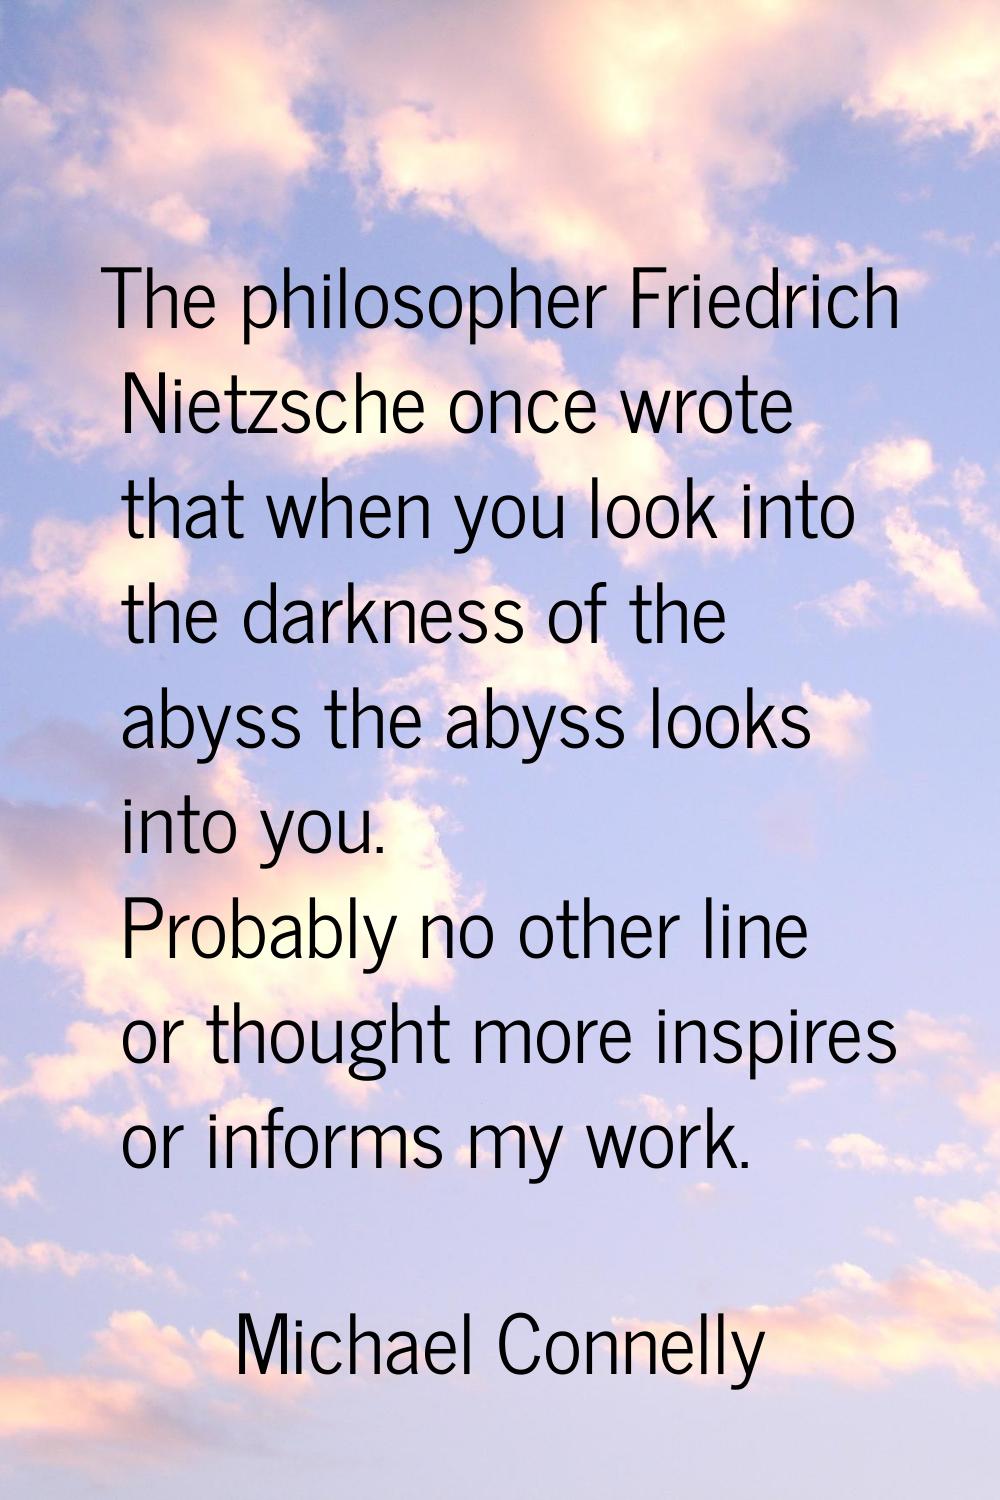 The philosopher Friedrich Nietzsche once wrote that when you look into the darkness of the abyss th